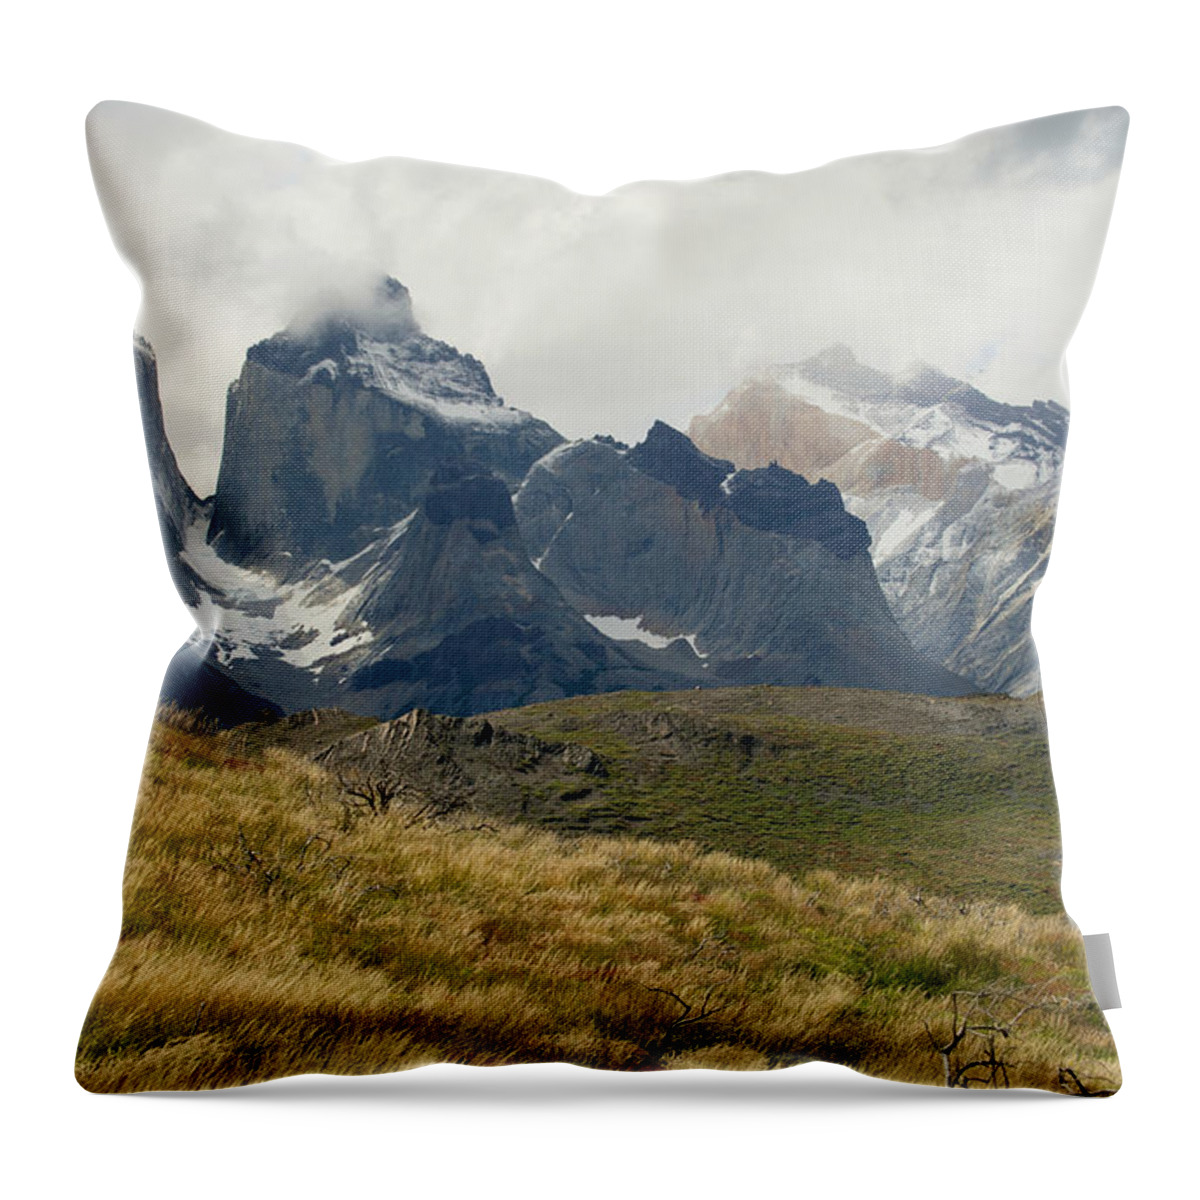 Photograph Throw Pillow featuring the photograph Paine Horne by Richard Gehlbach